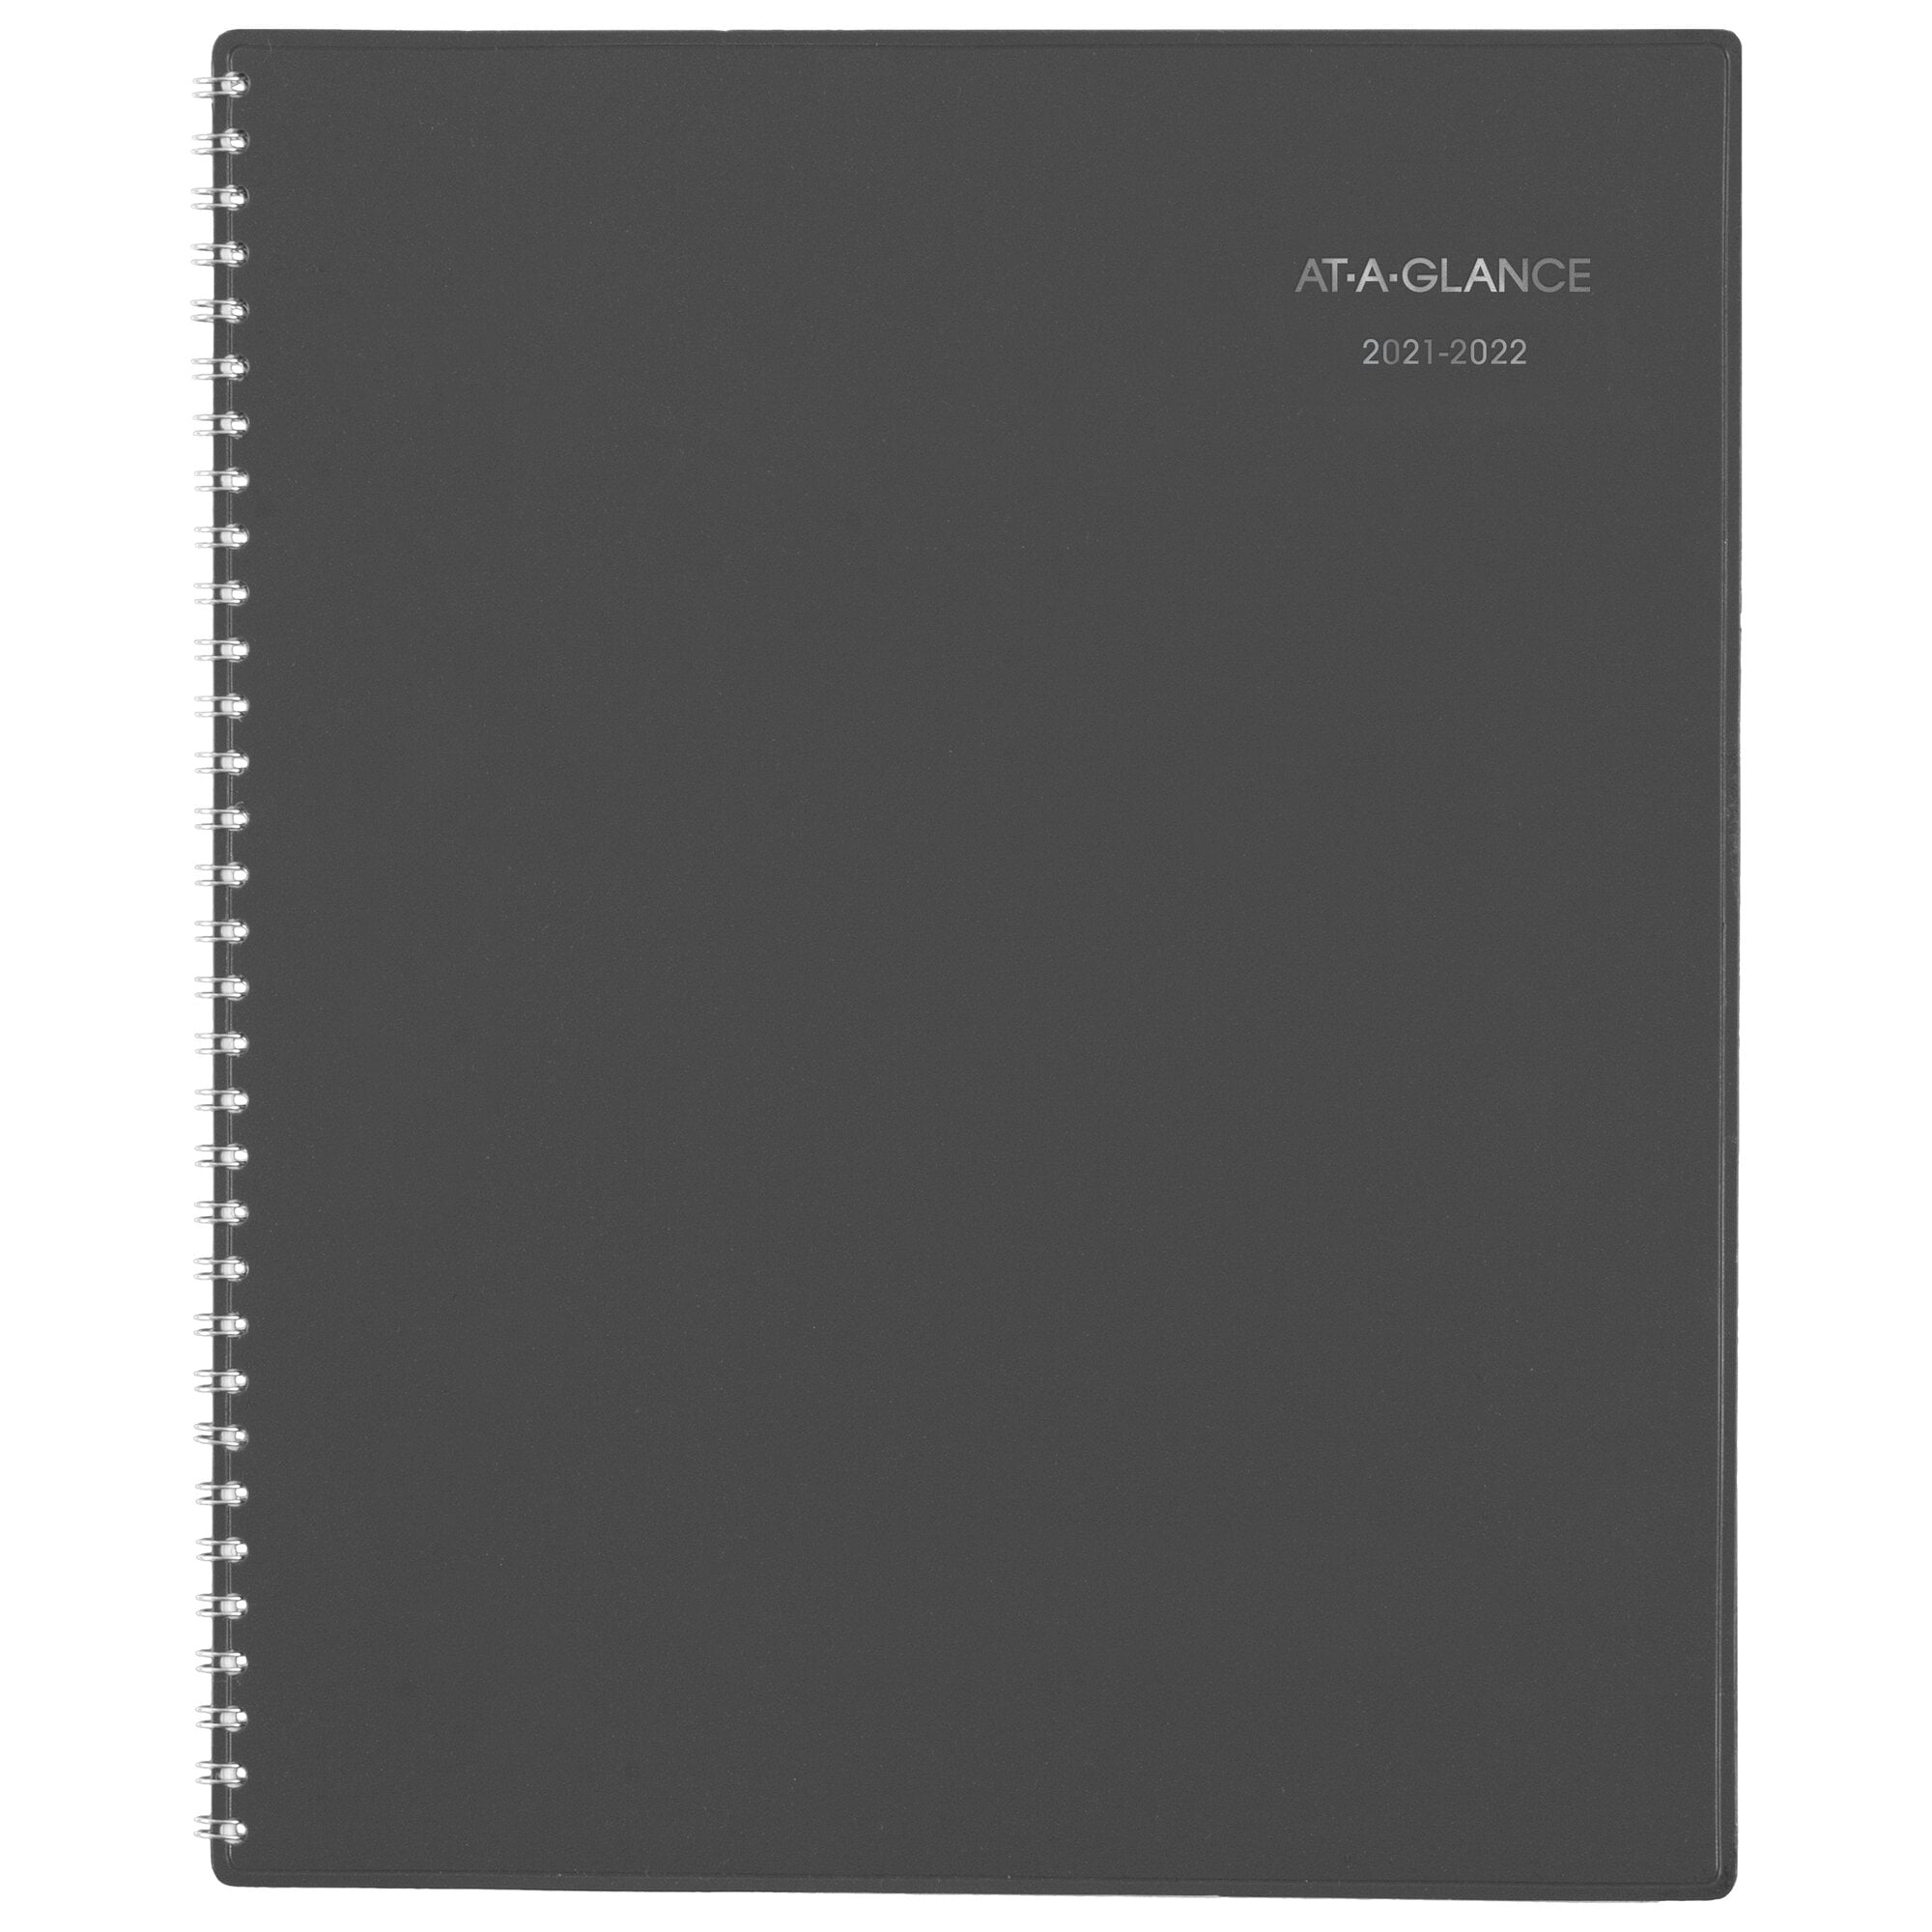 AT-A-GLANCE 2018-2019 Academic Year Daily Planner / Appointment Book Small 4-7/8 x 8 AY4400 DayMinder Black